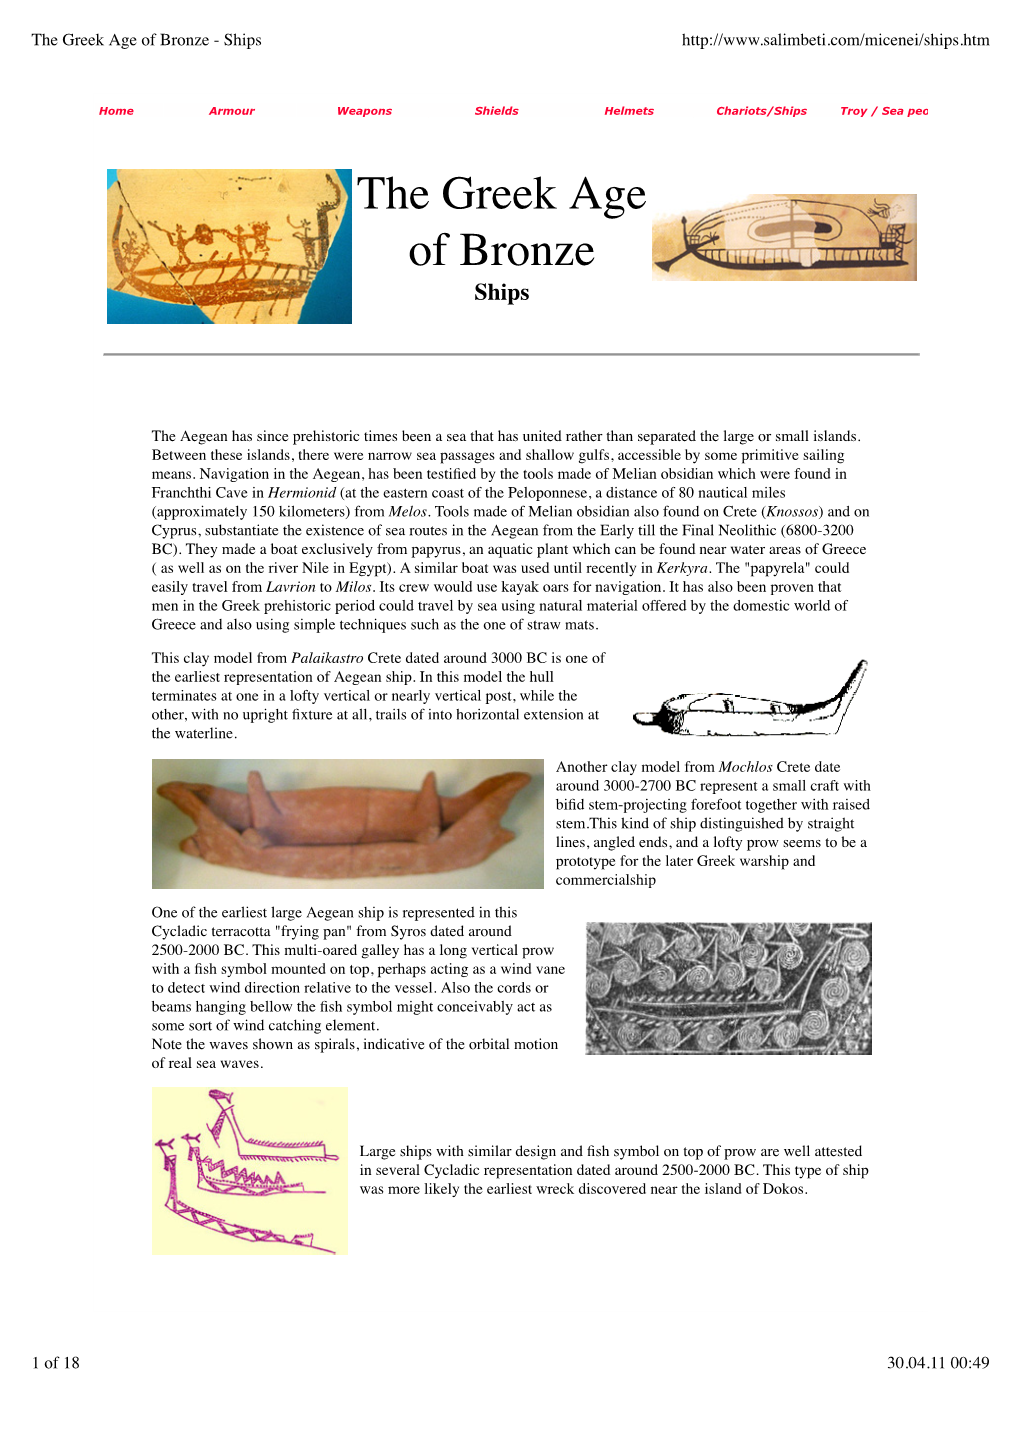 The Greek Age of Bronze - Ships